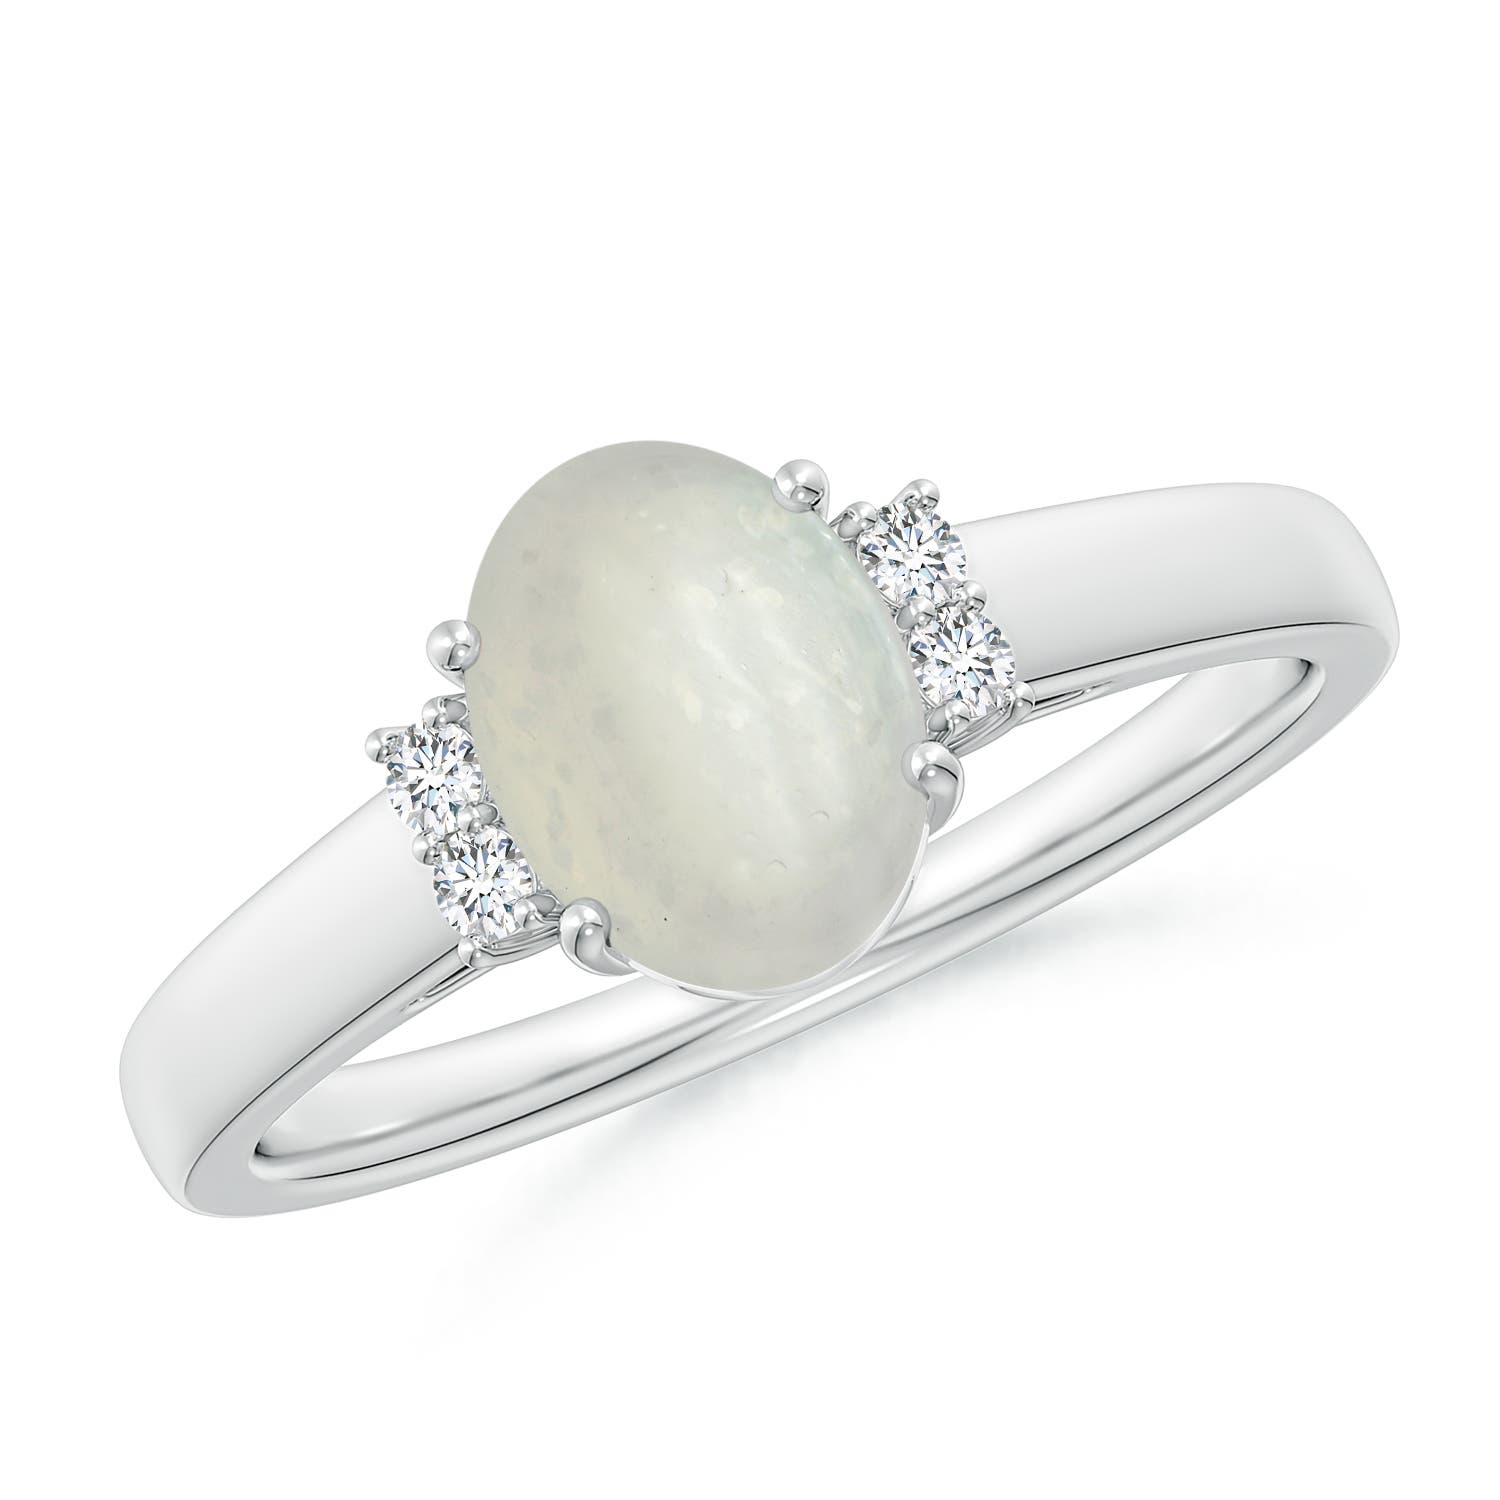 A - Moonstone / 1.17 CT / 14 KT White Gold